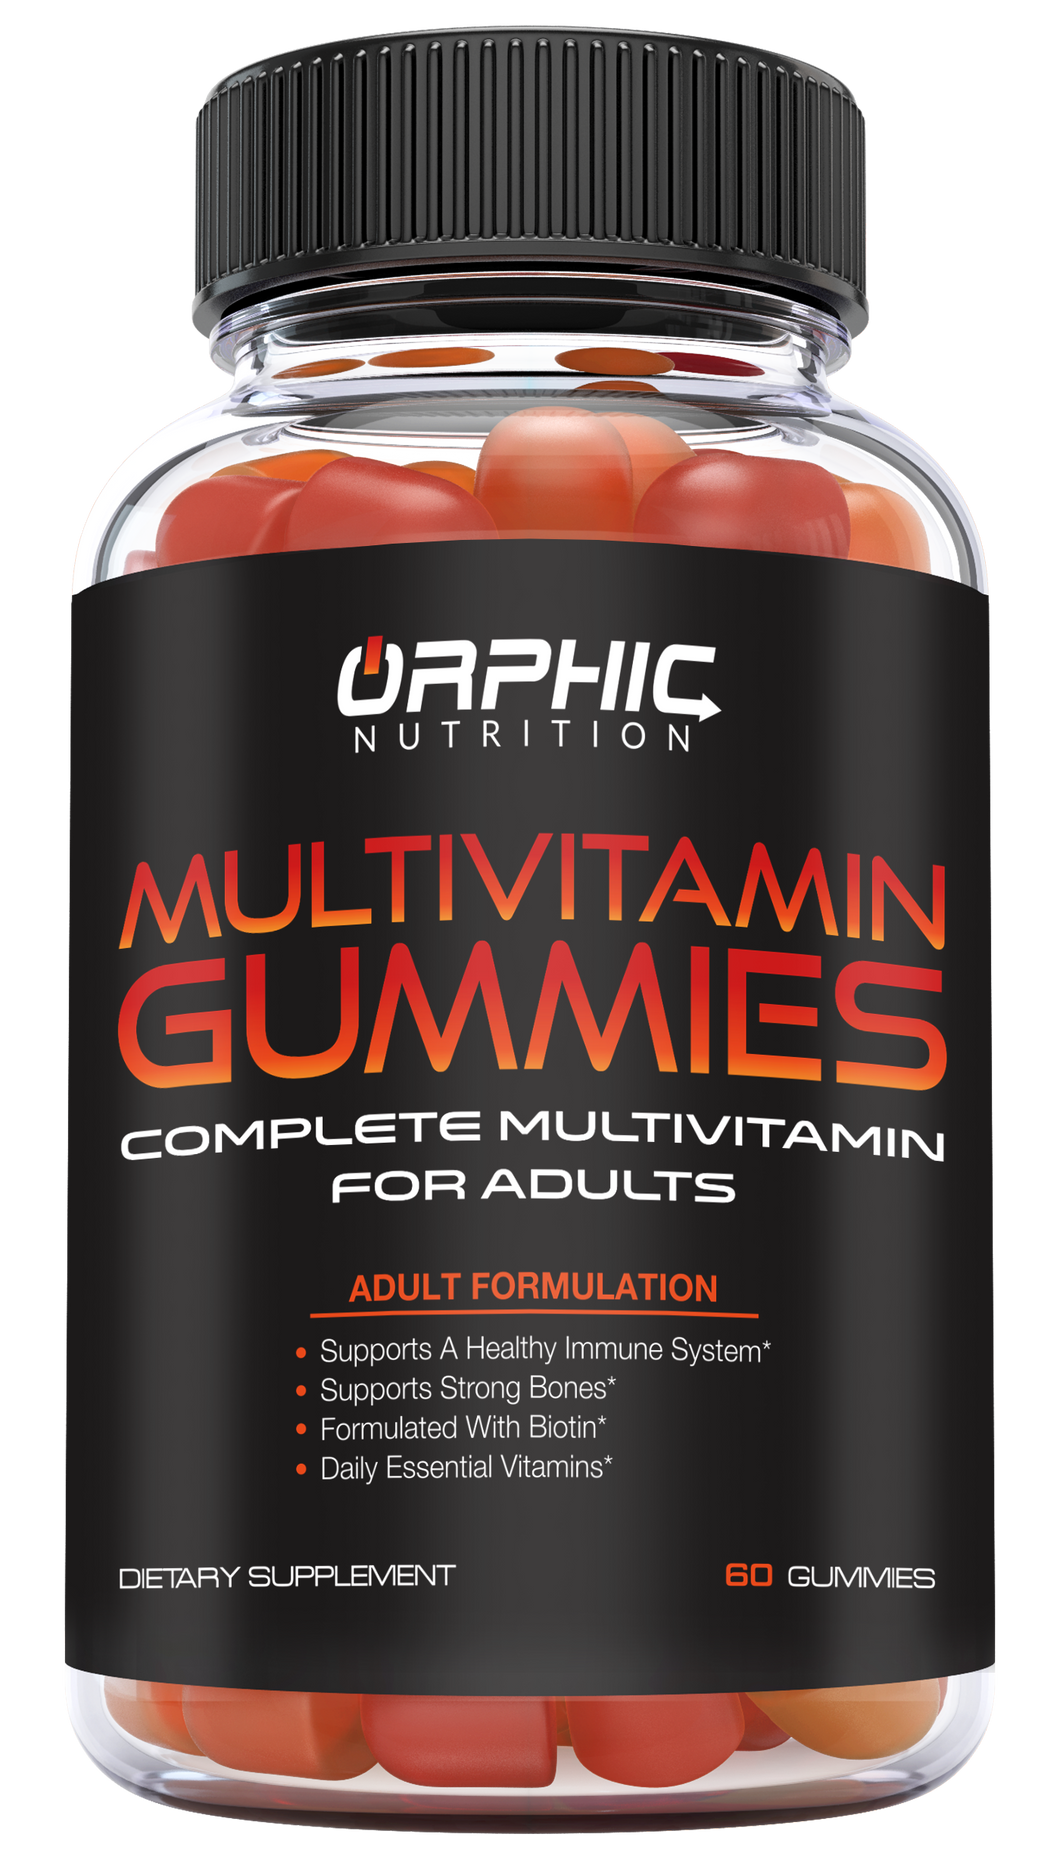 Multivitamin Gummies for Adults